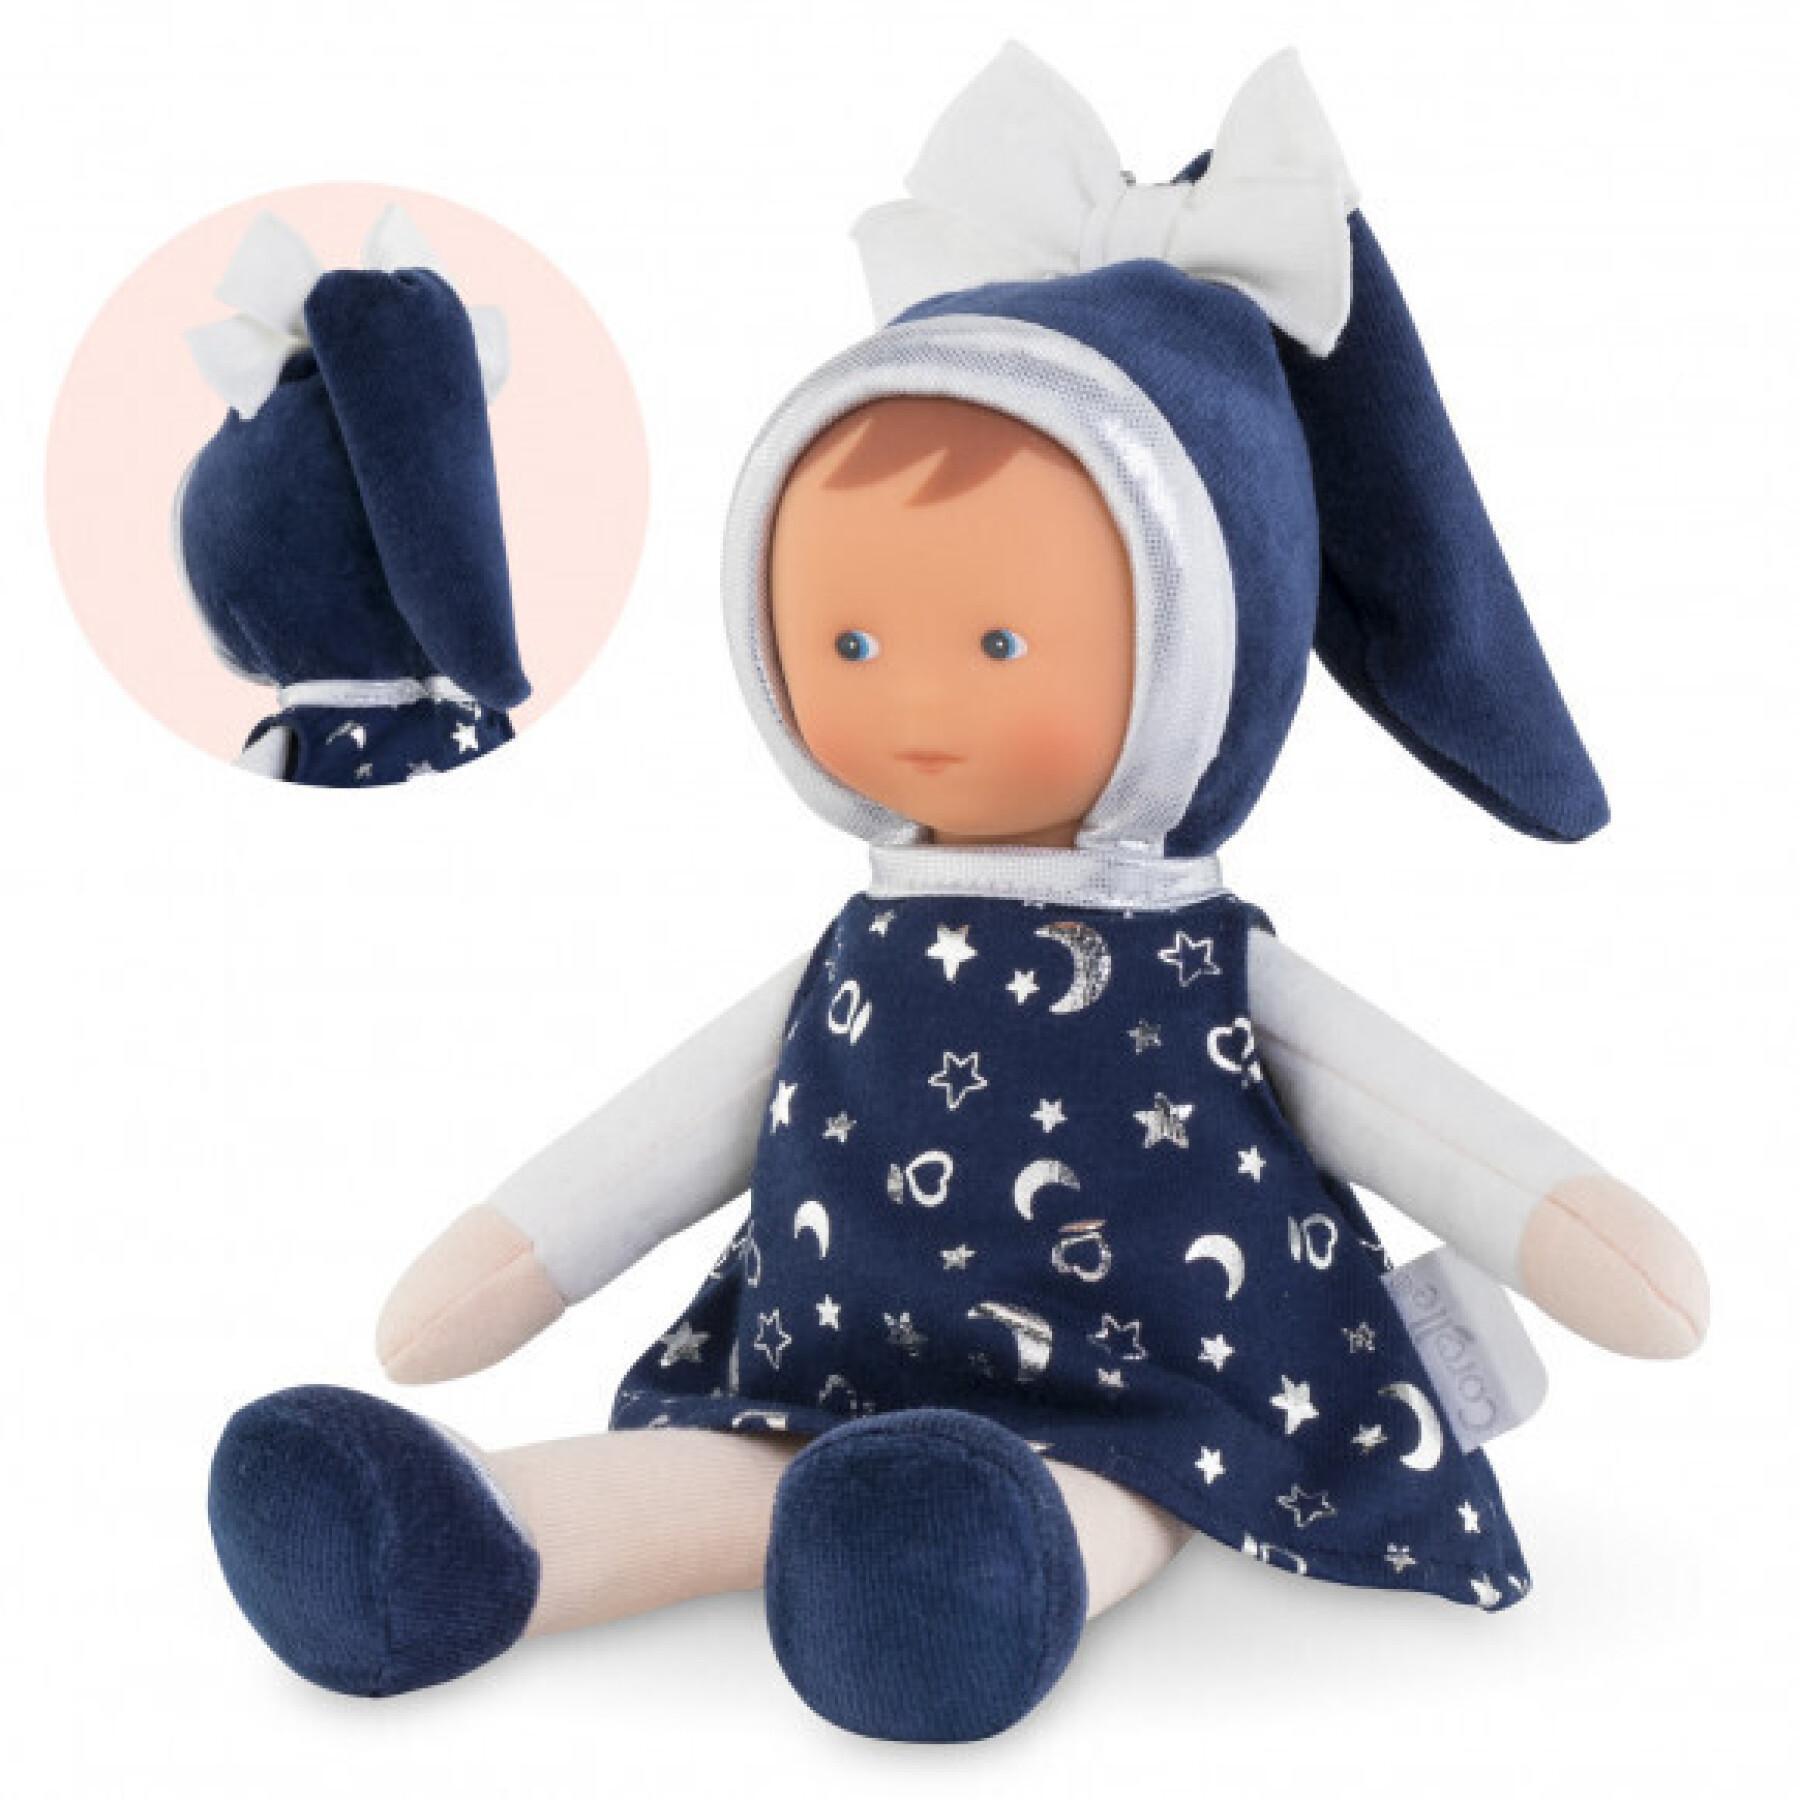 Starry night cuddly toy Corolle